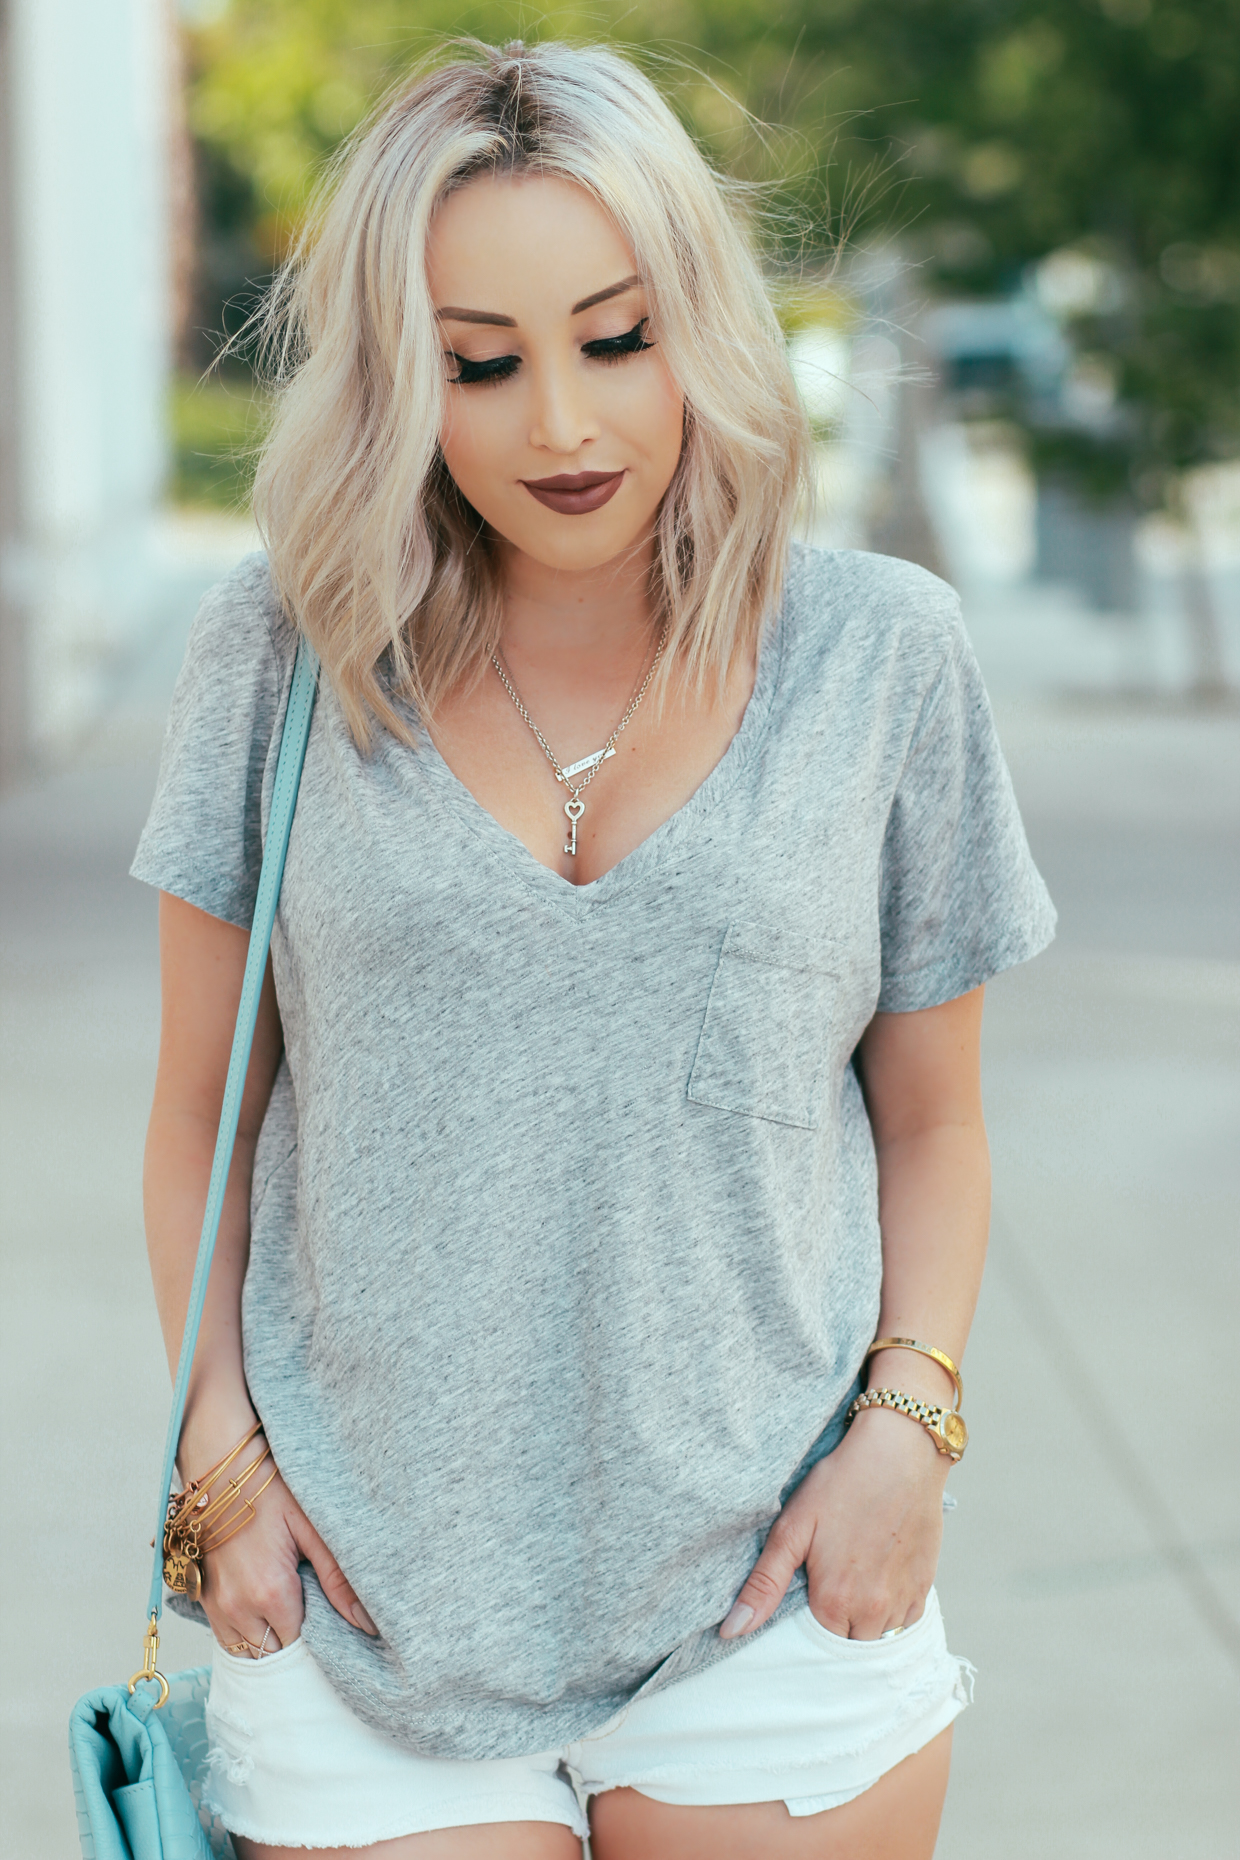 Blondie in the City | Perfect, Simple V-Neck Tee by @madewell - Crossbody Reversible Clutch by @giginewyork